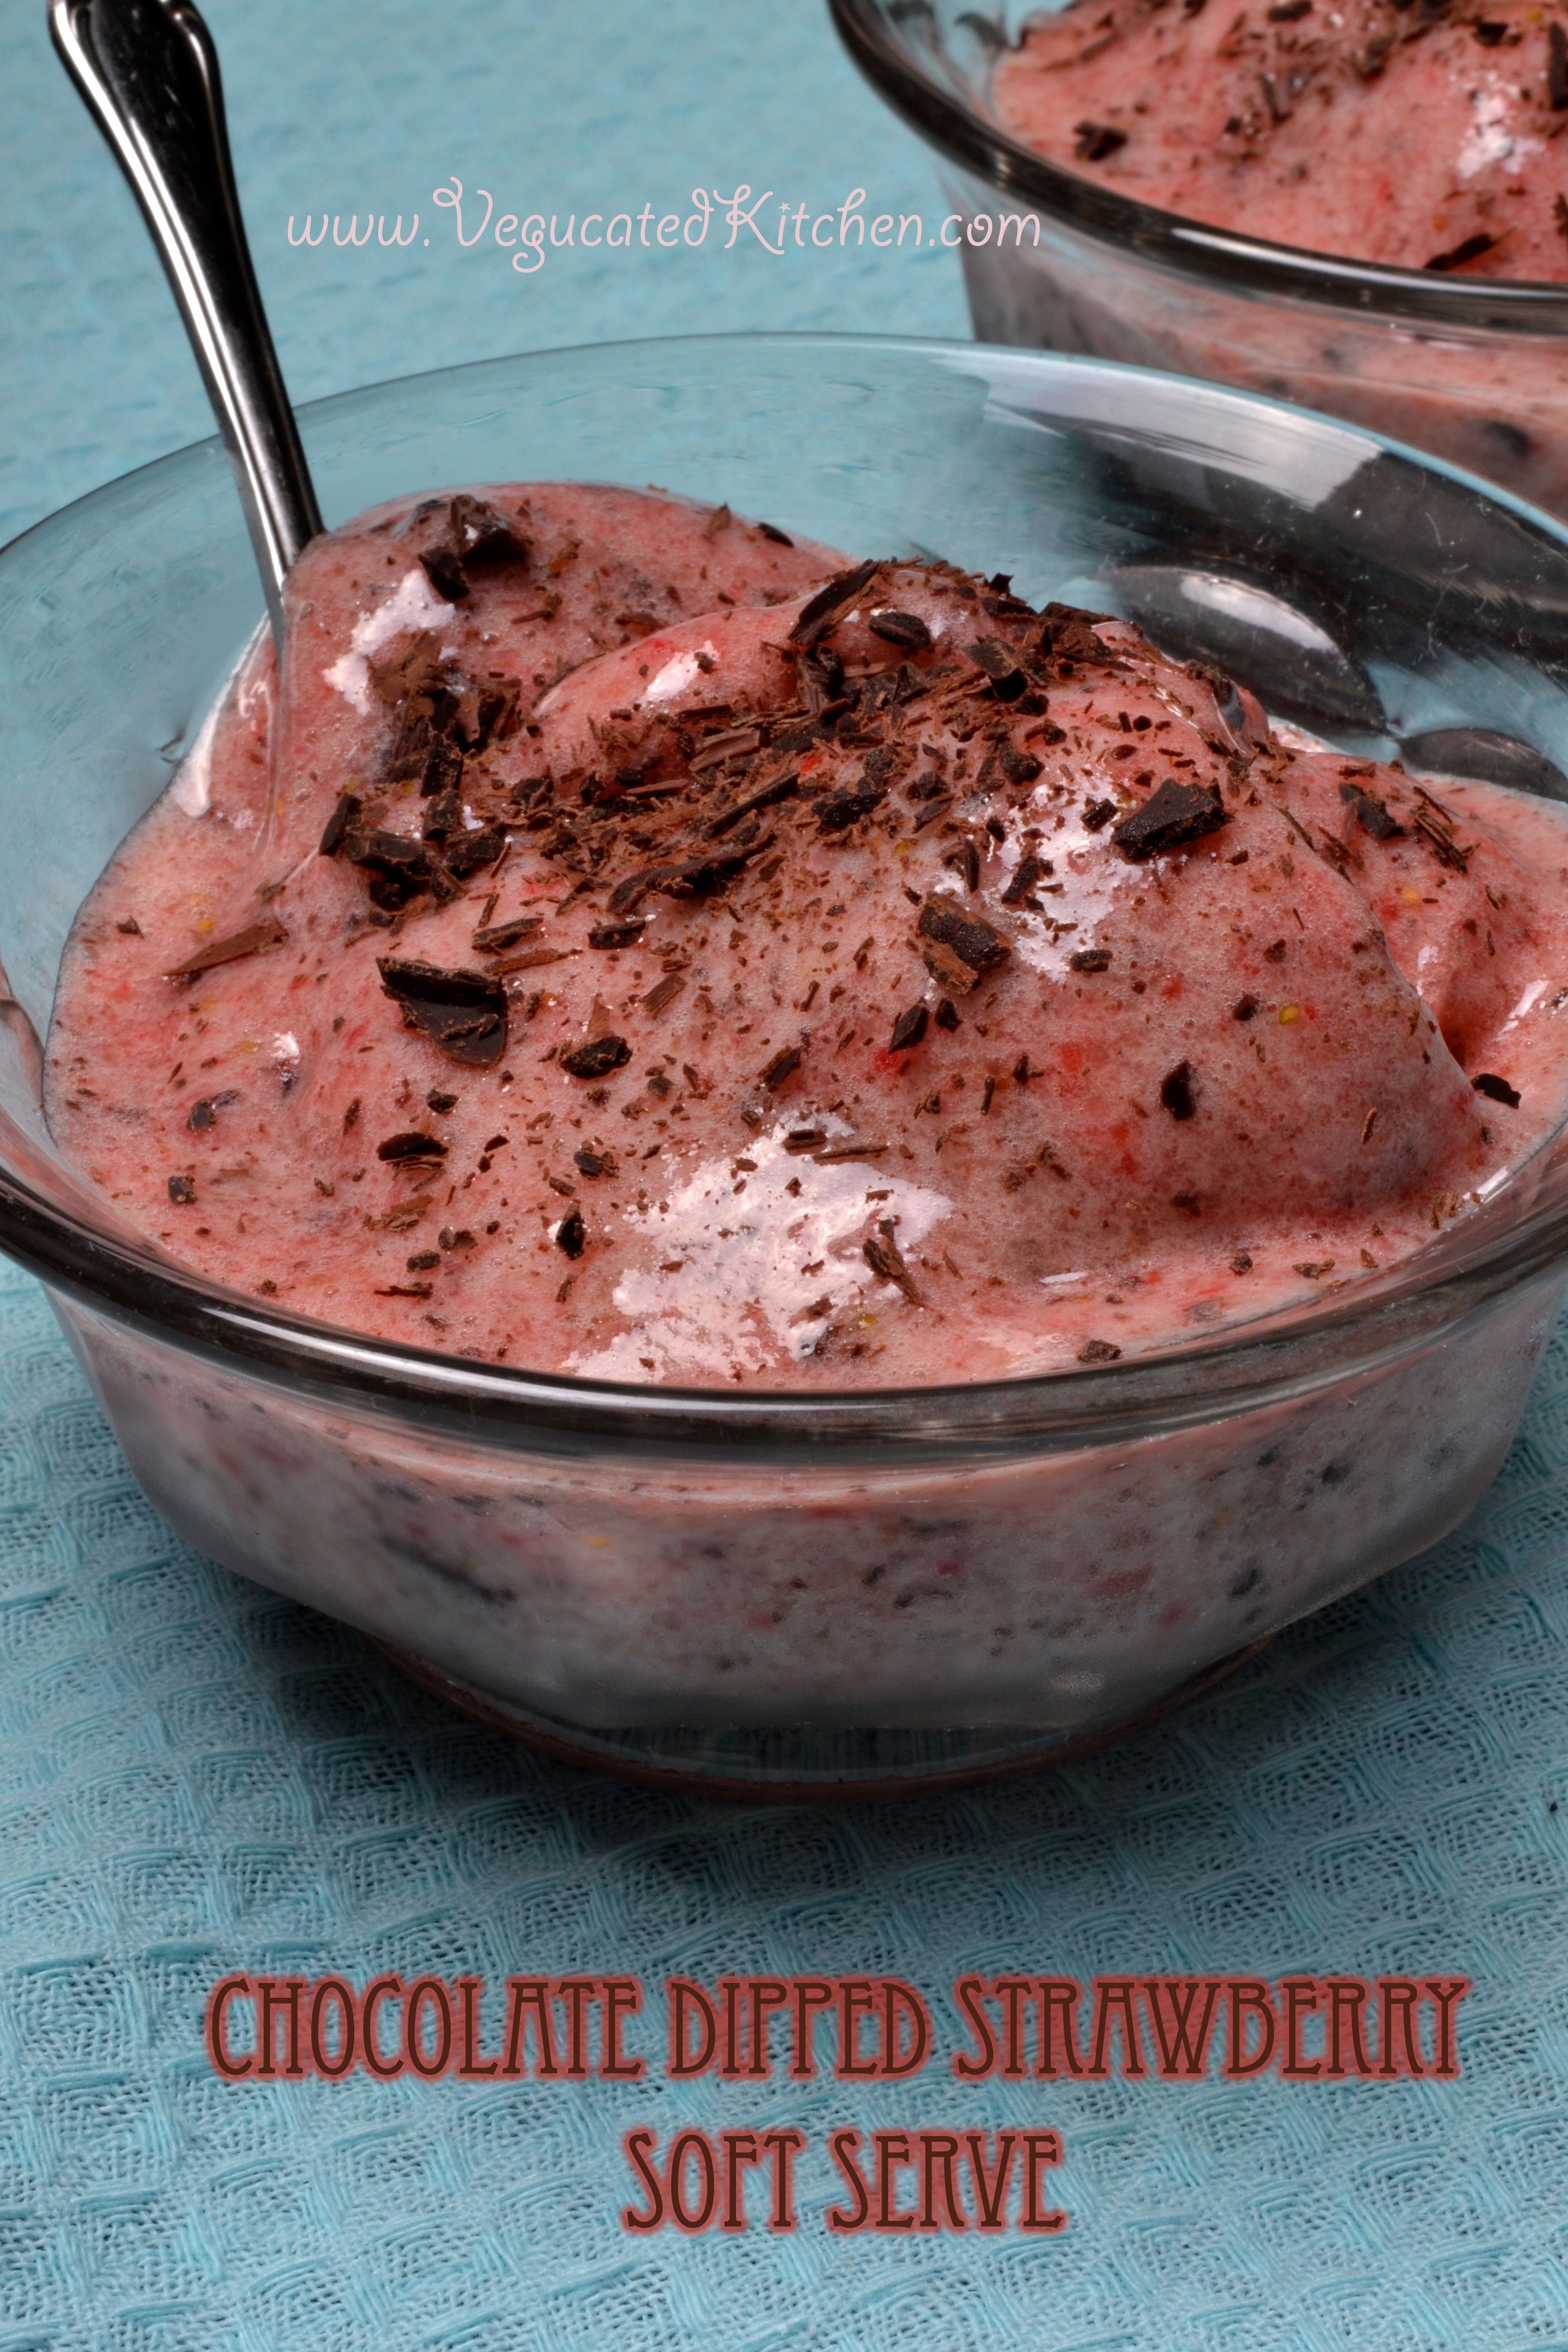 Chocolate dipped strawberry soft serve! Simple, easy and healthy dessert to shar